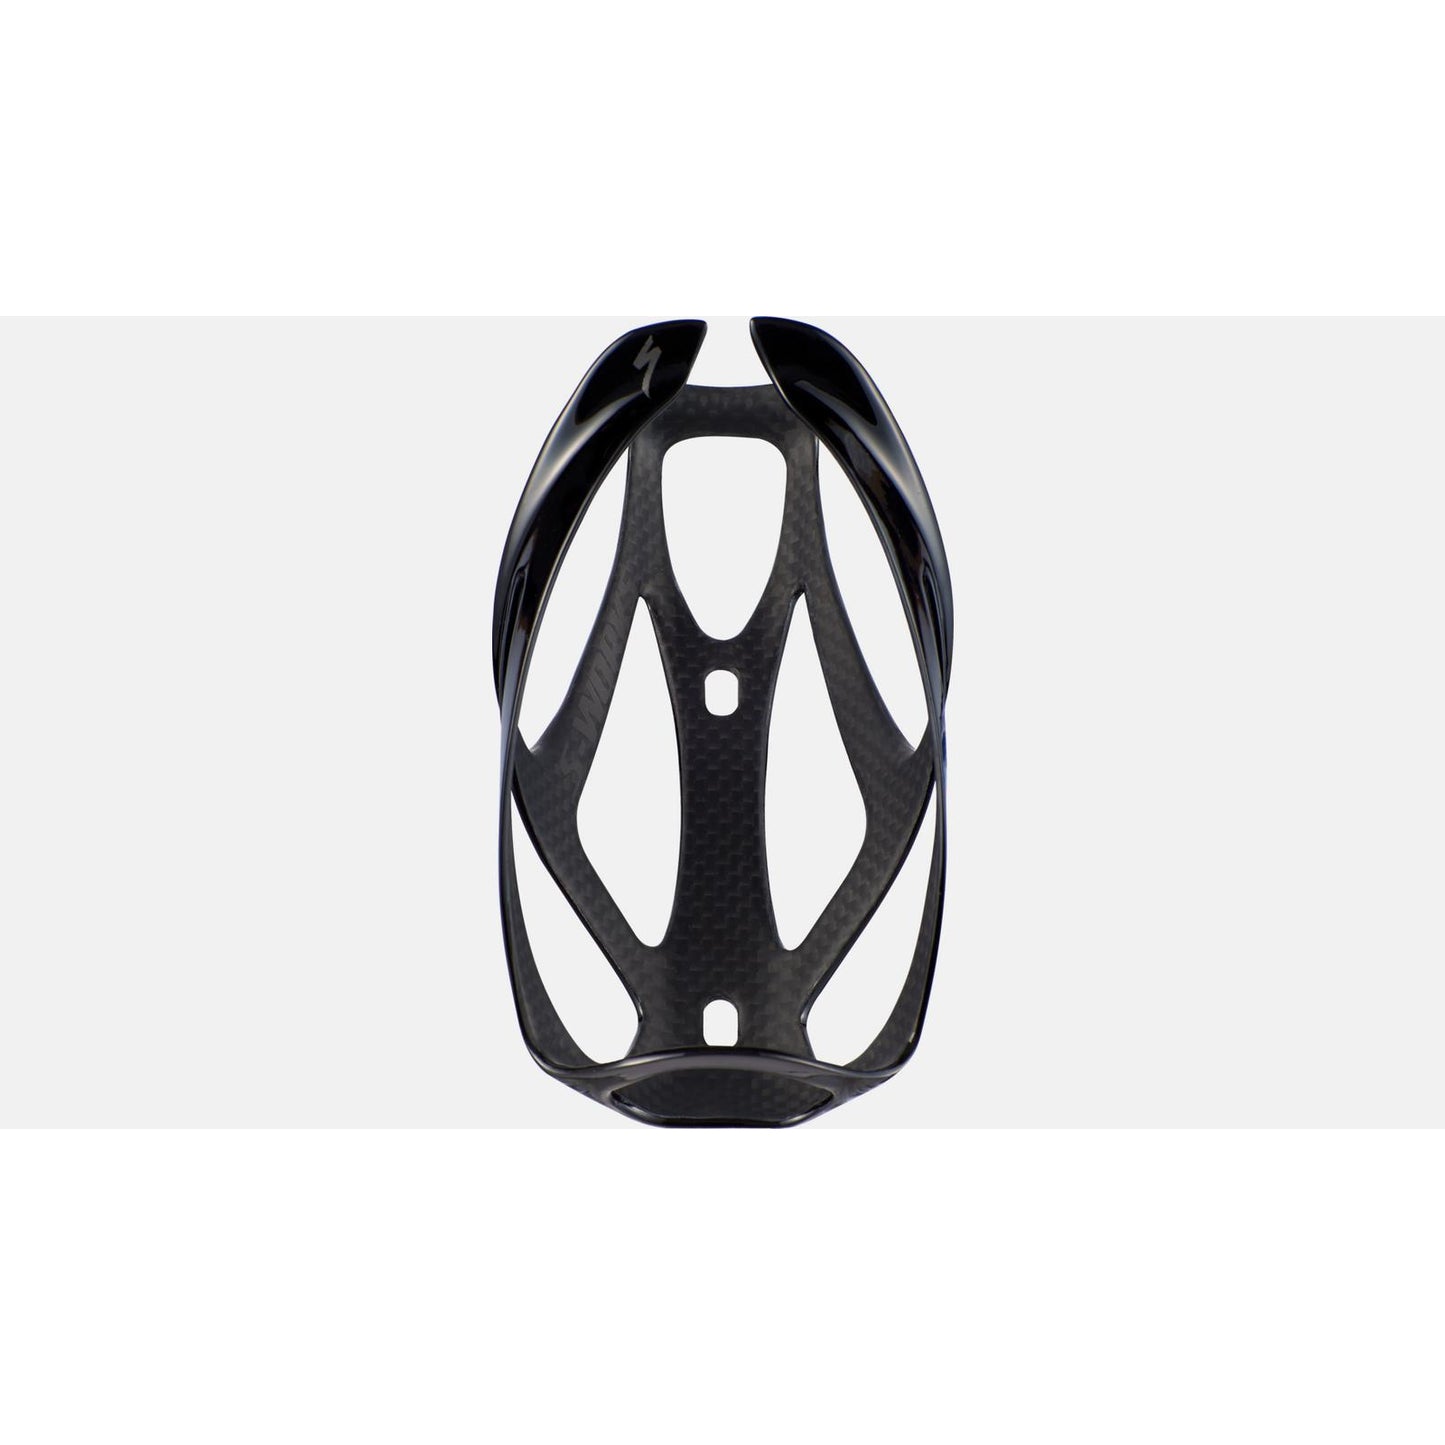 Specialized S-Works Carbon Rib Cage III - Cages - Bicycle Warehouse